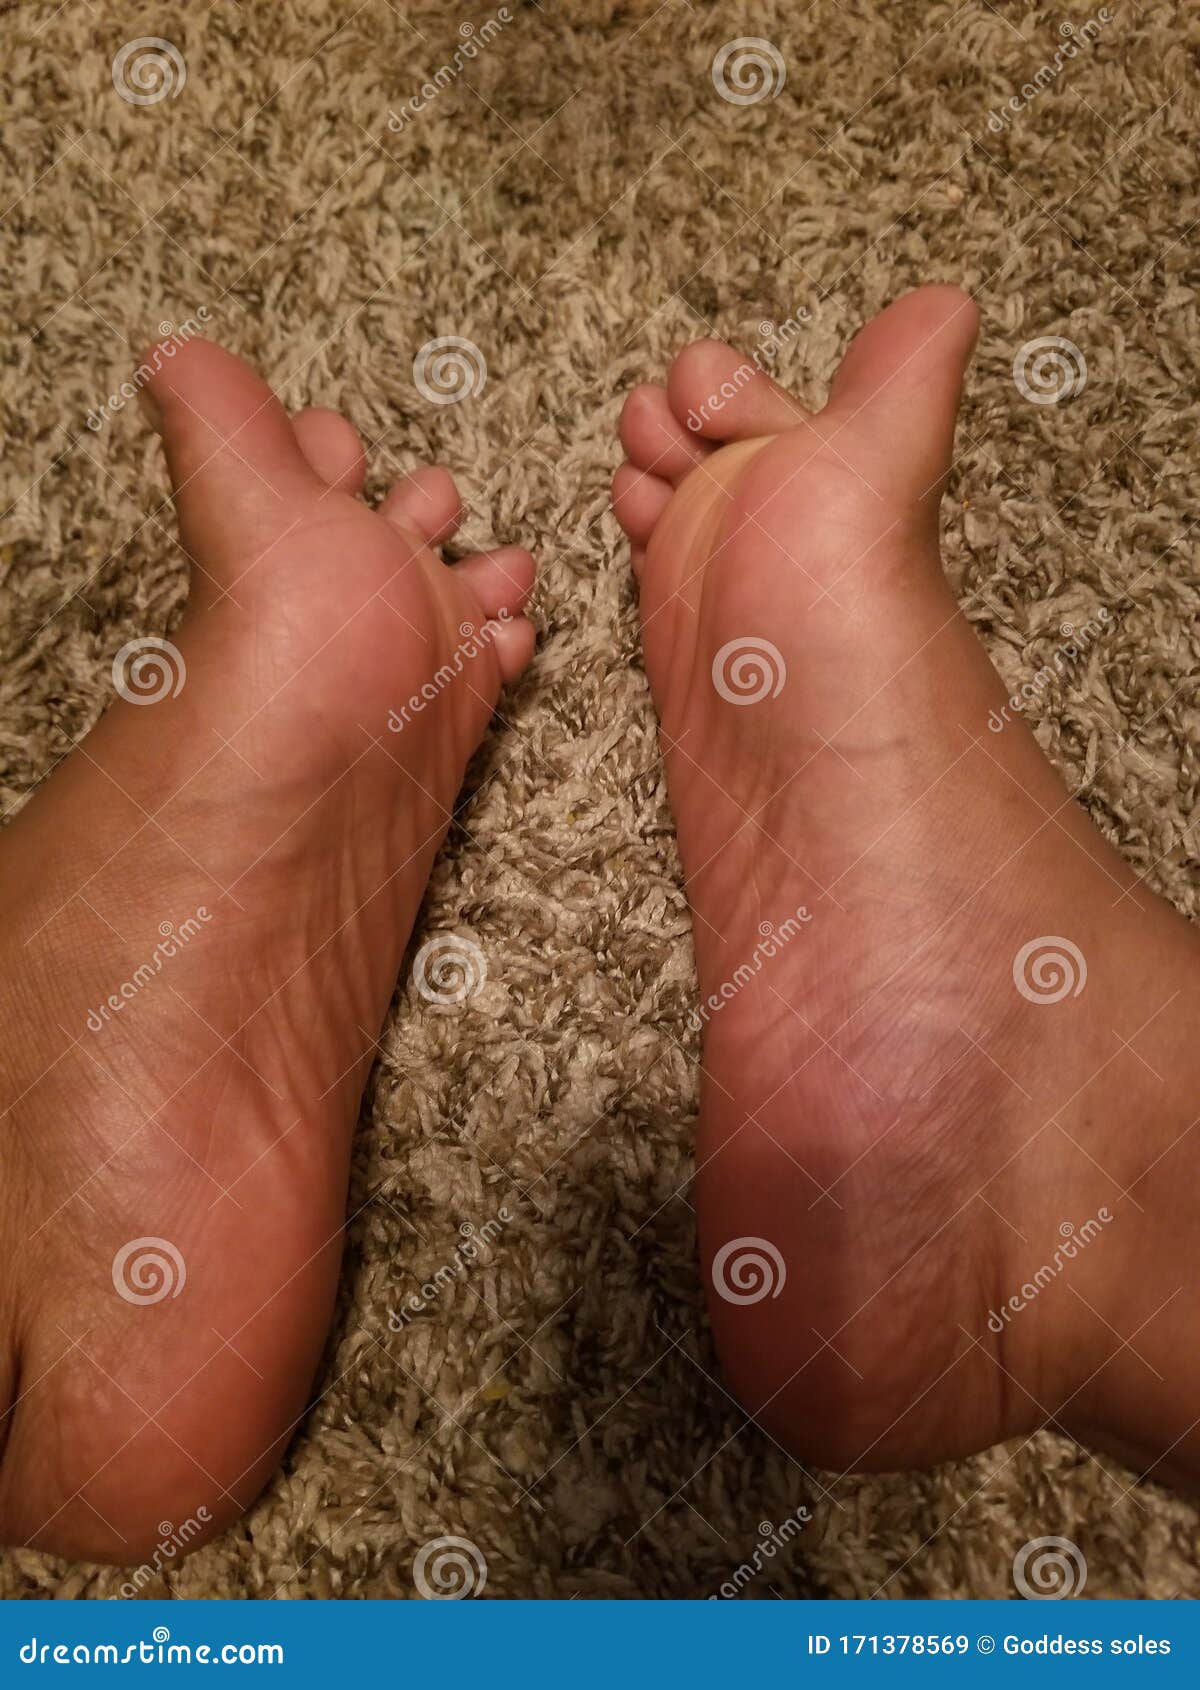 Sexy soles in the pose